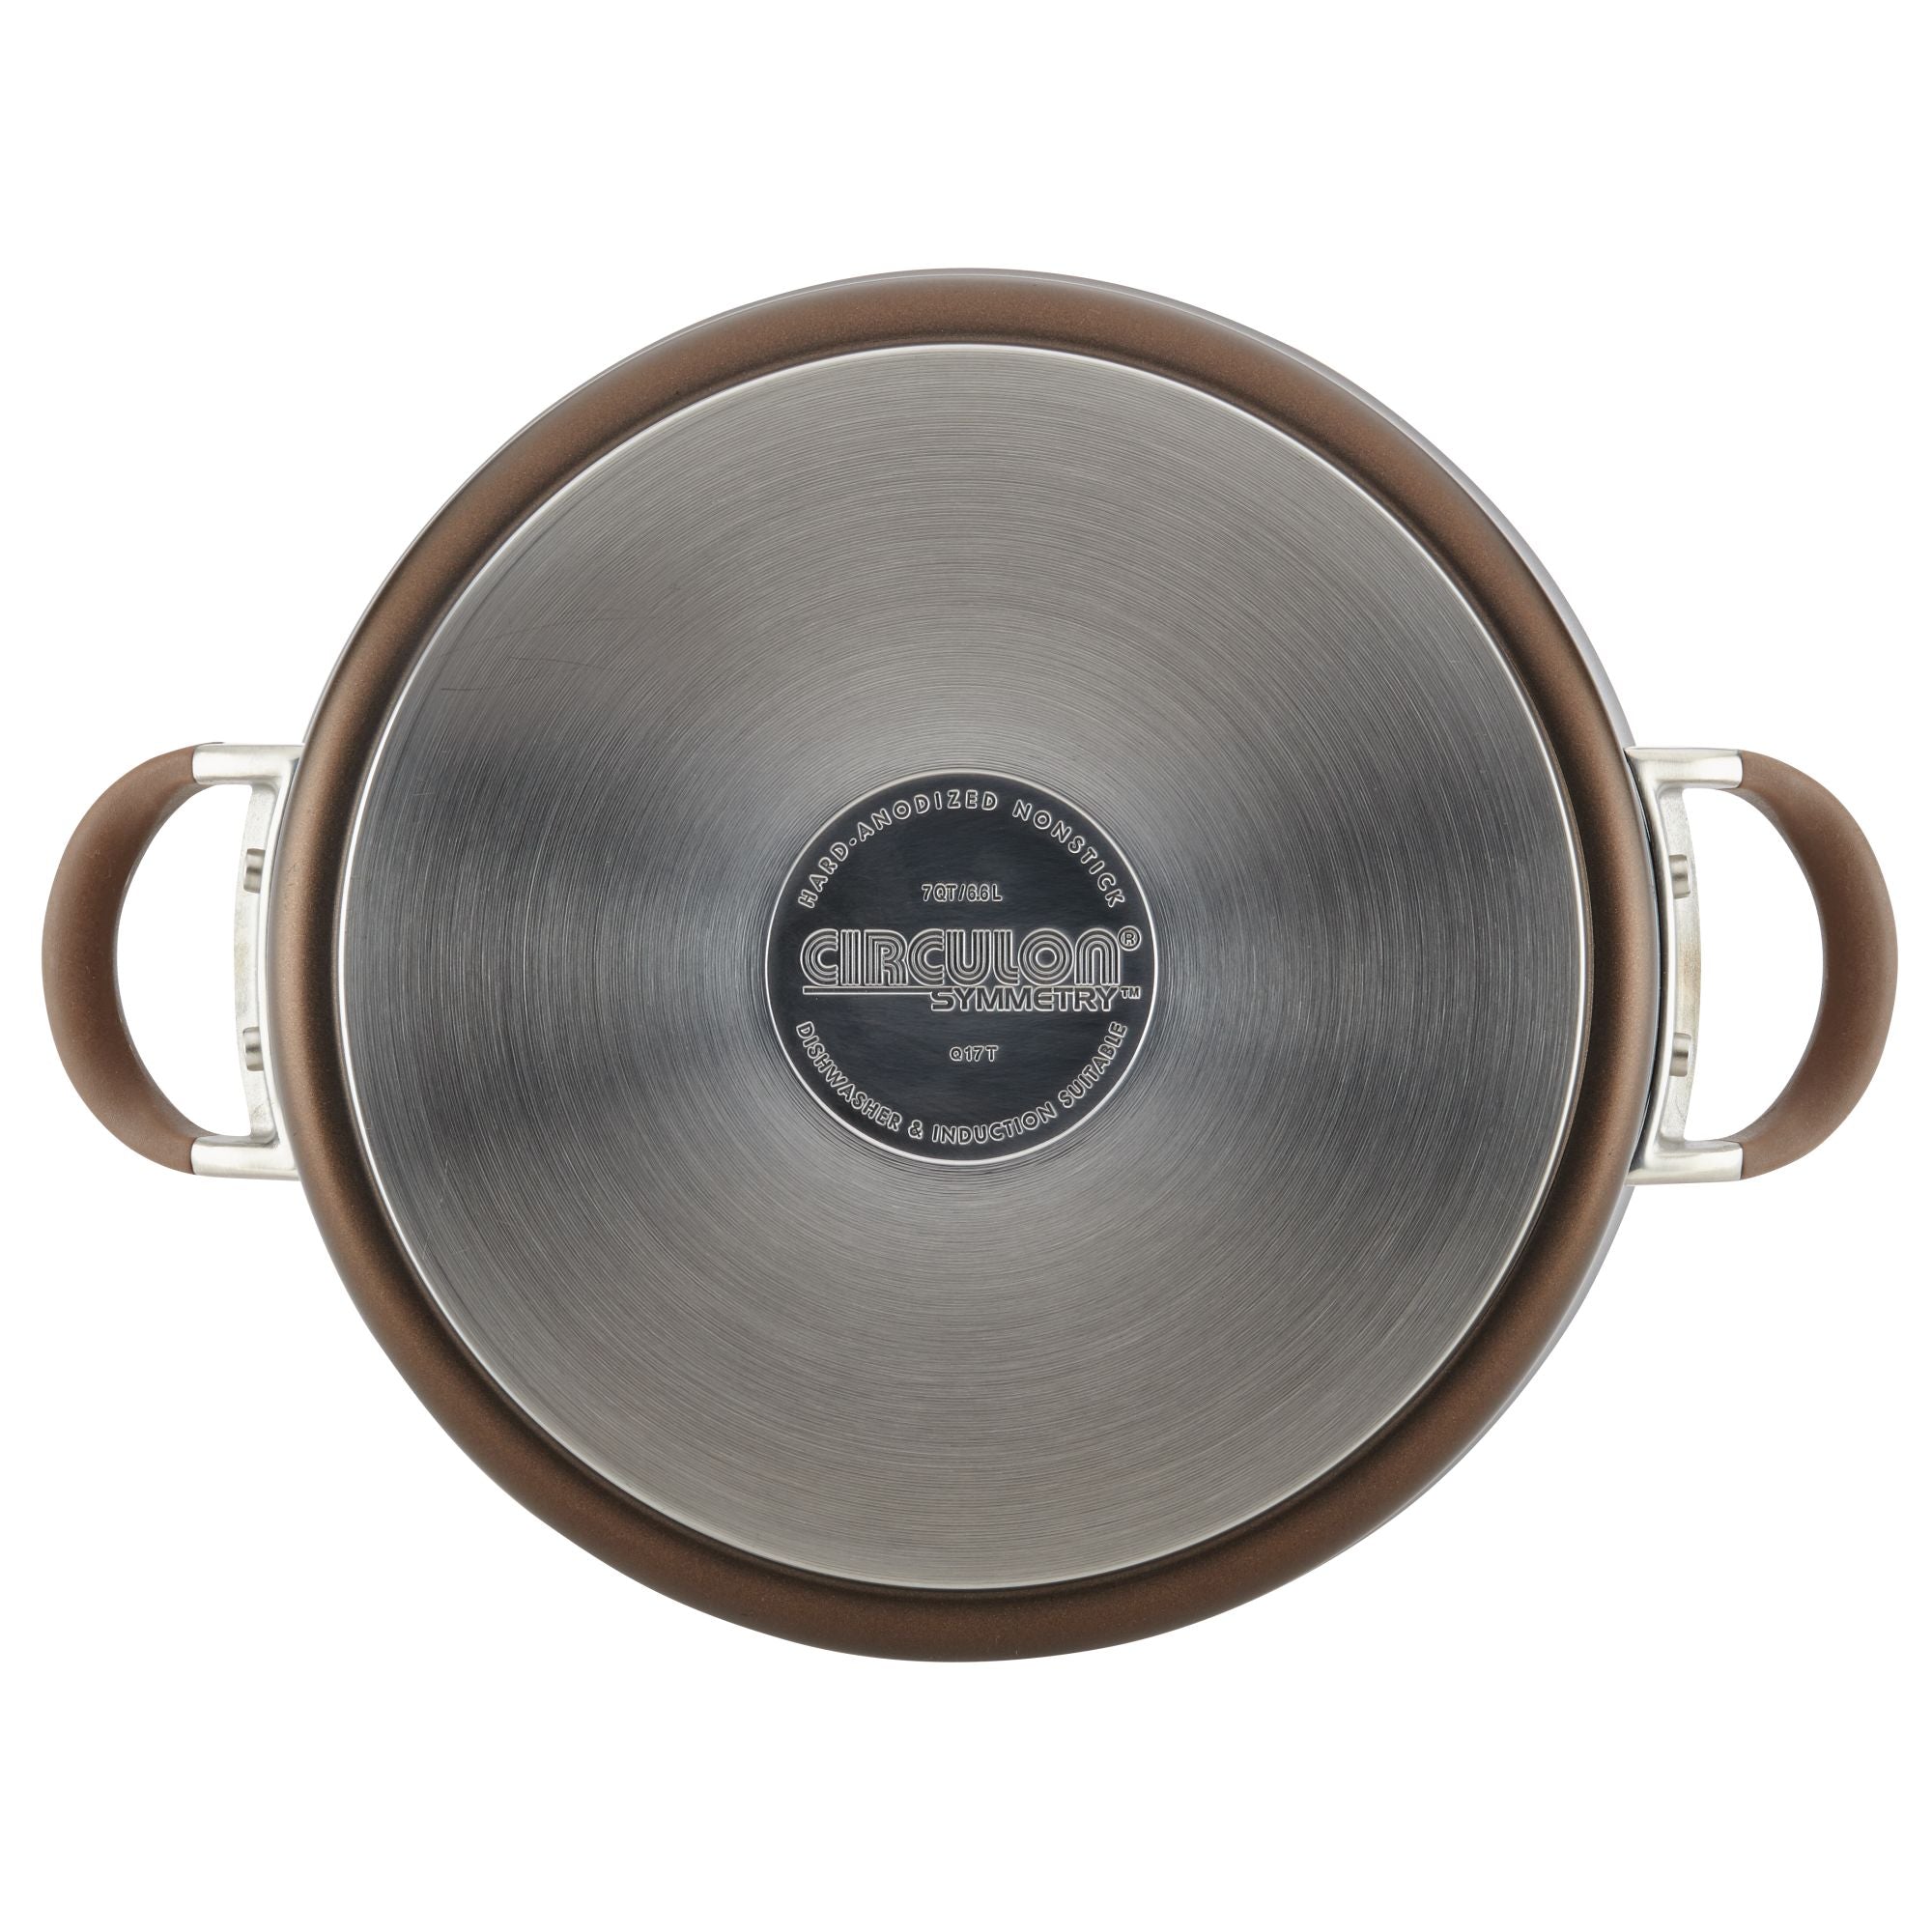 7 Qt Stainless Steel Saute Pan